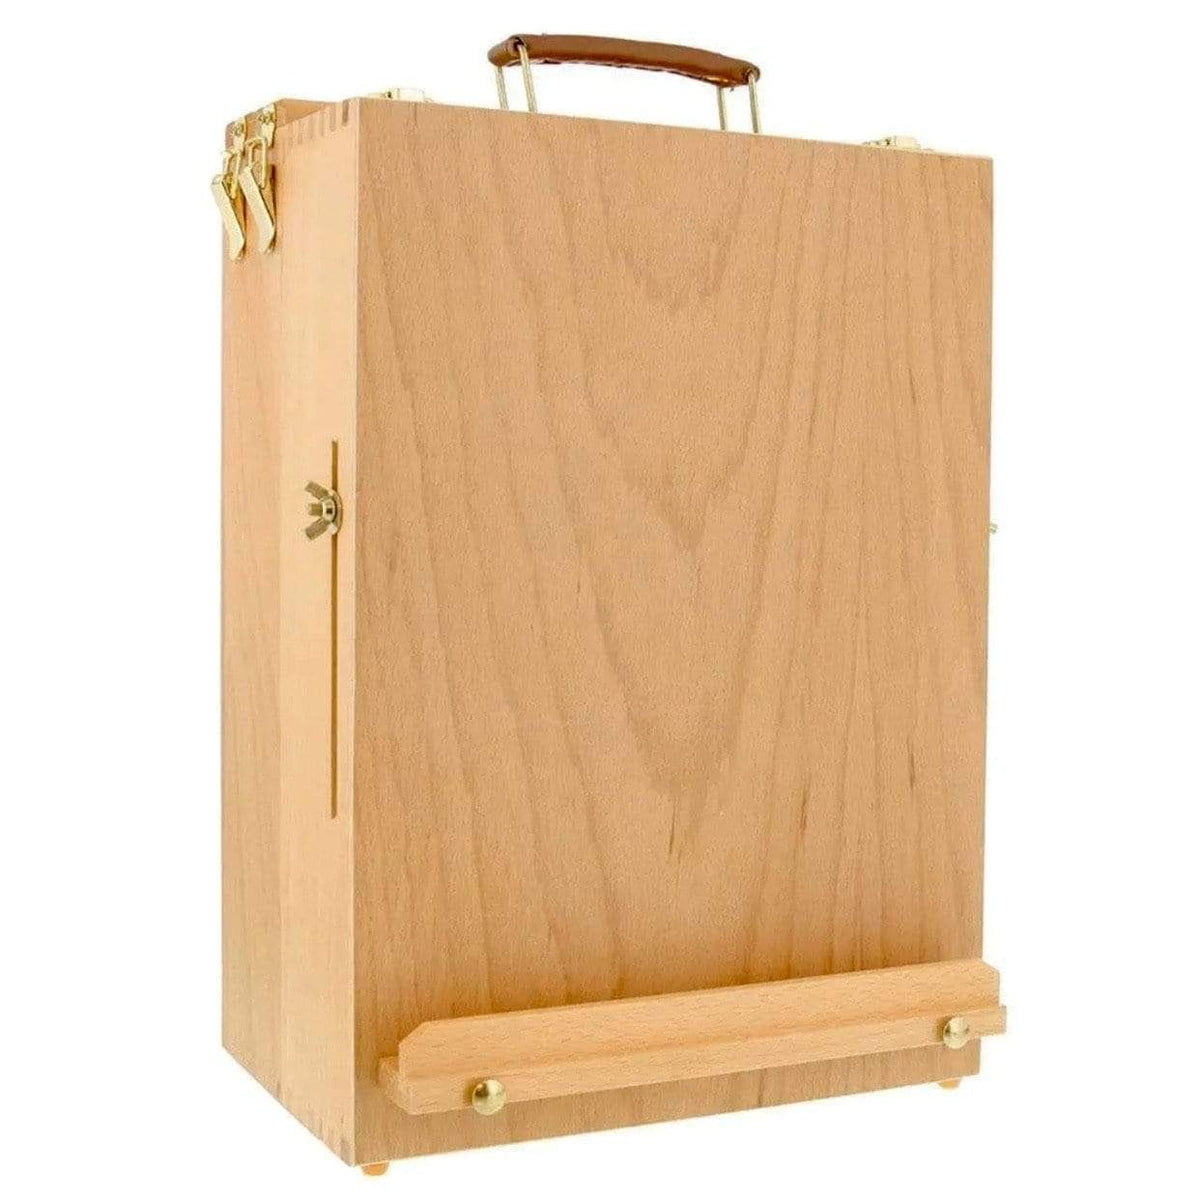 KINGART® Wooden Tabletop Easel with Metal-Lined Storage Drawer